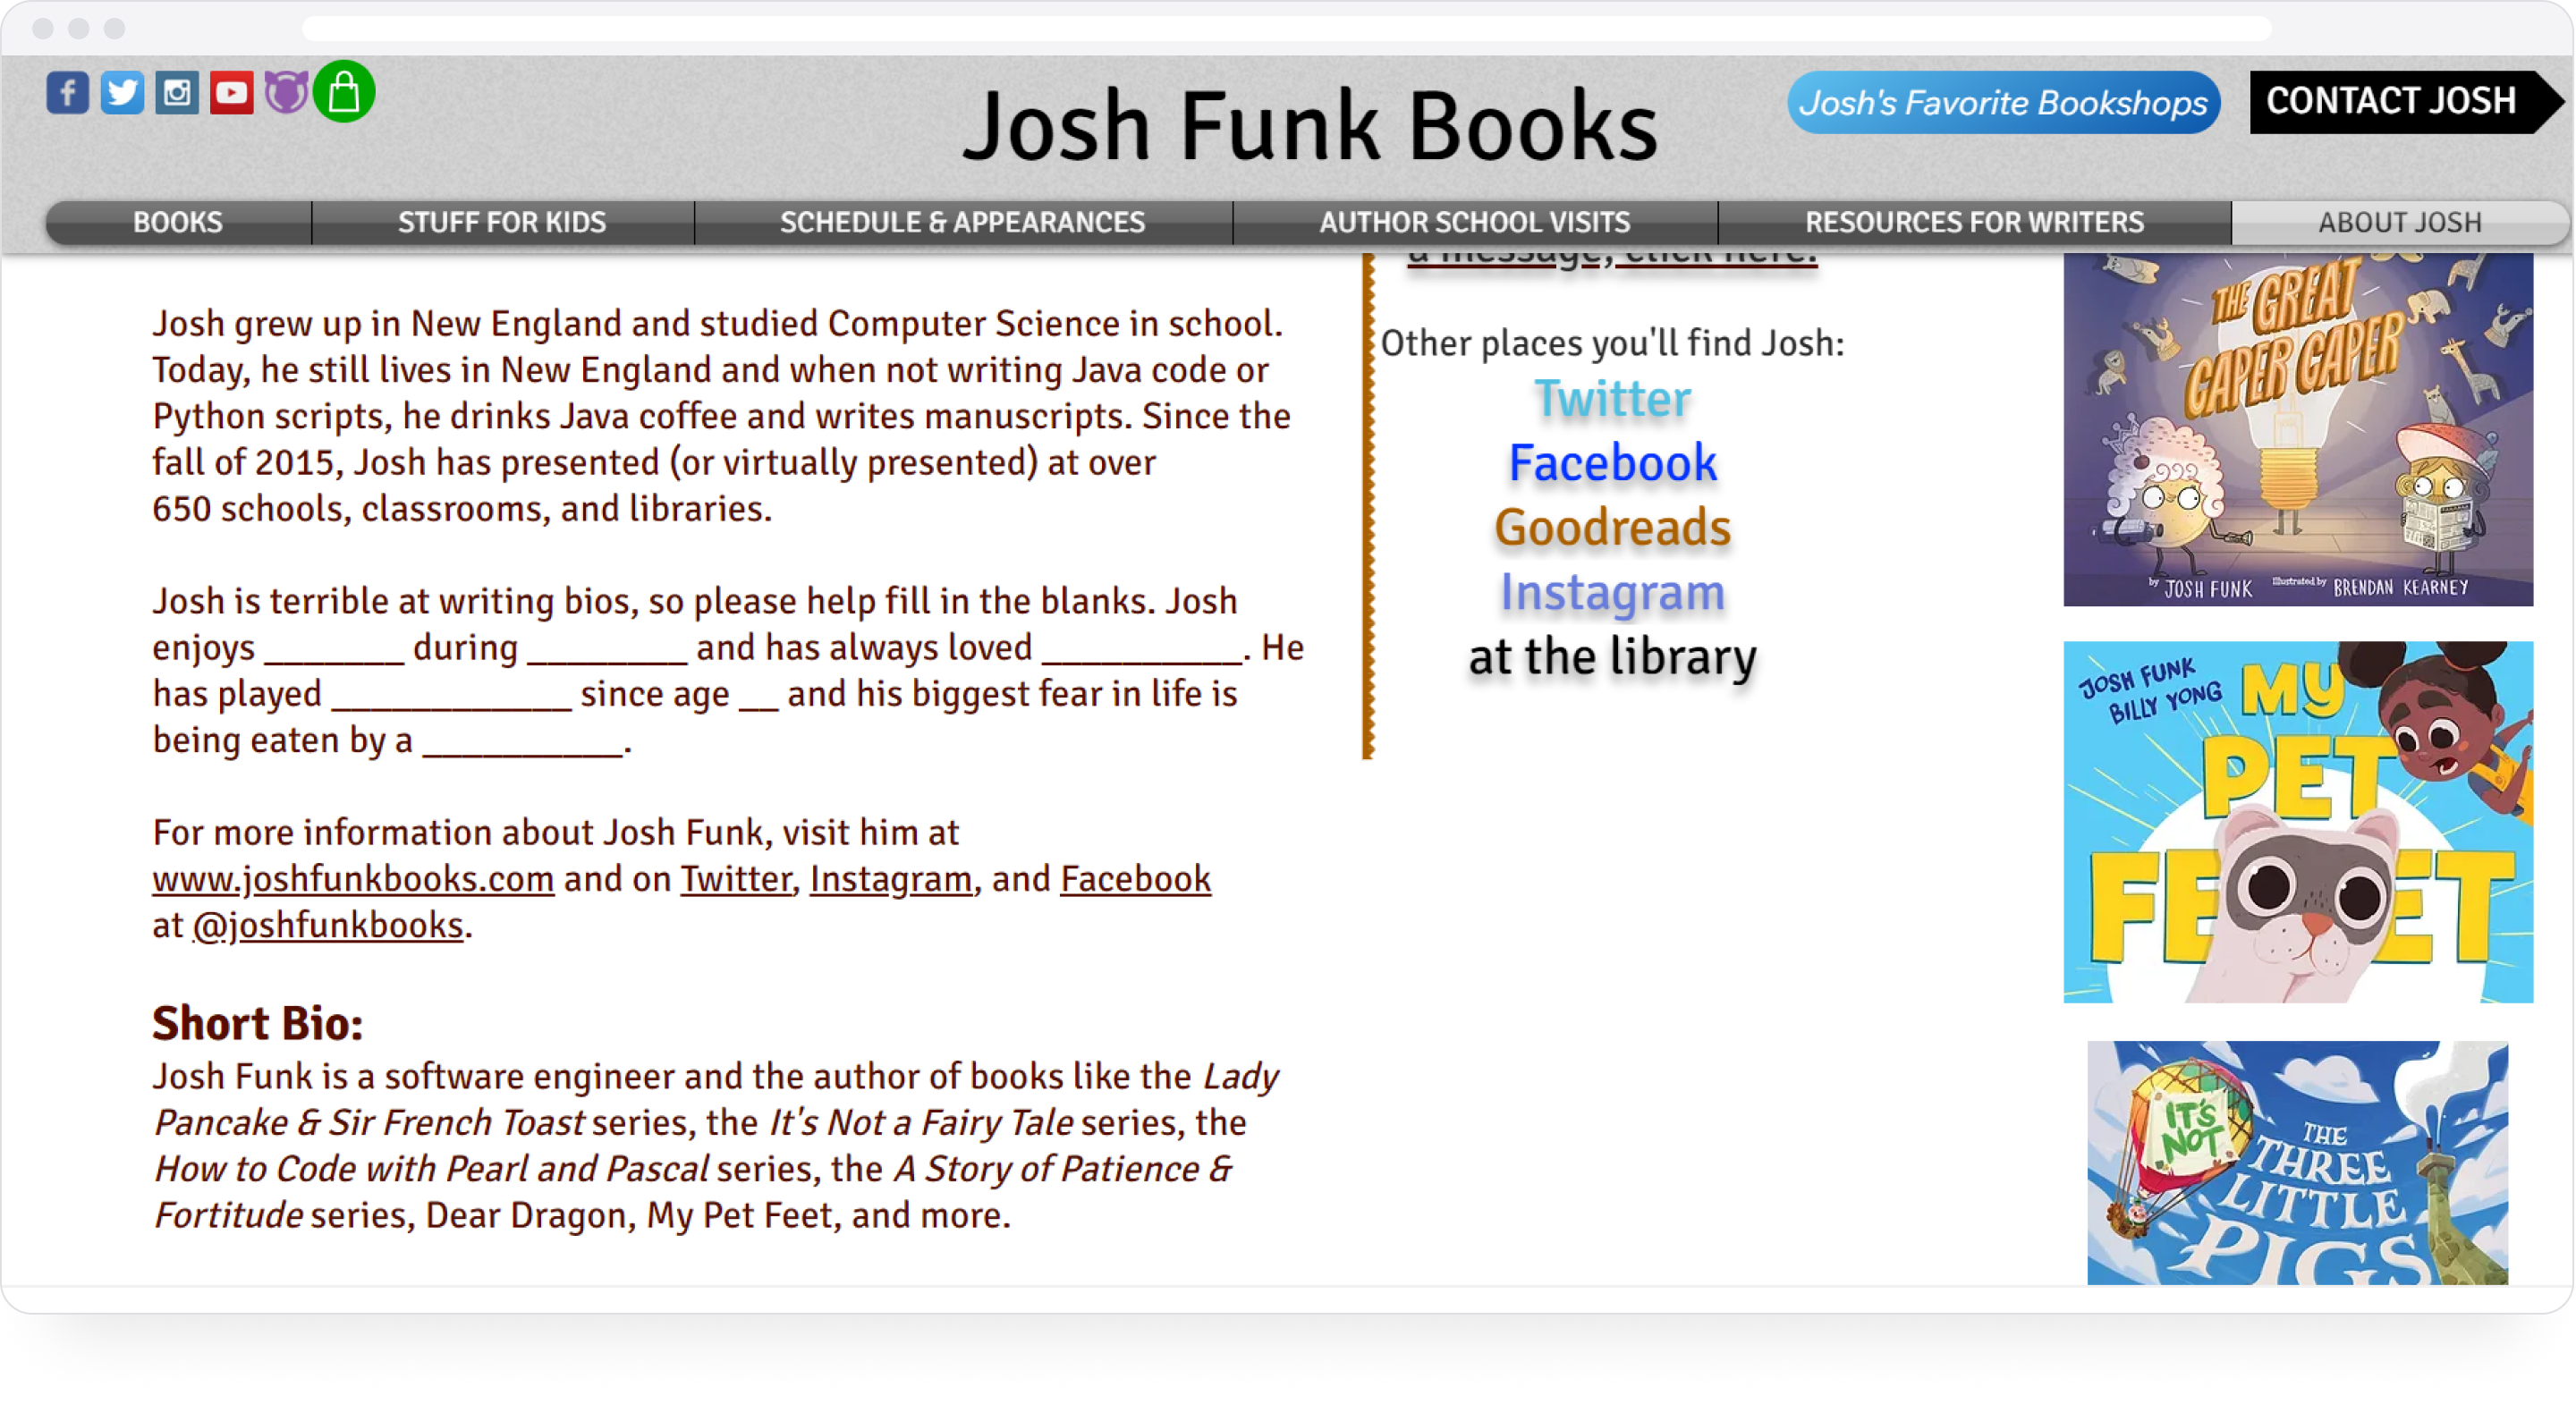 Josh Funk's "About Me" section